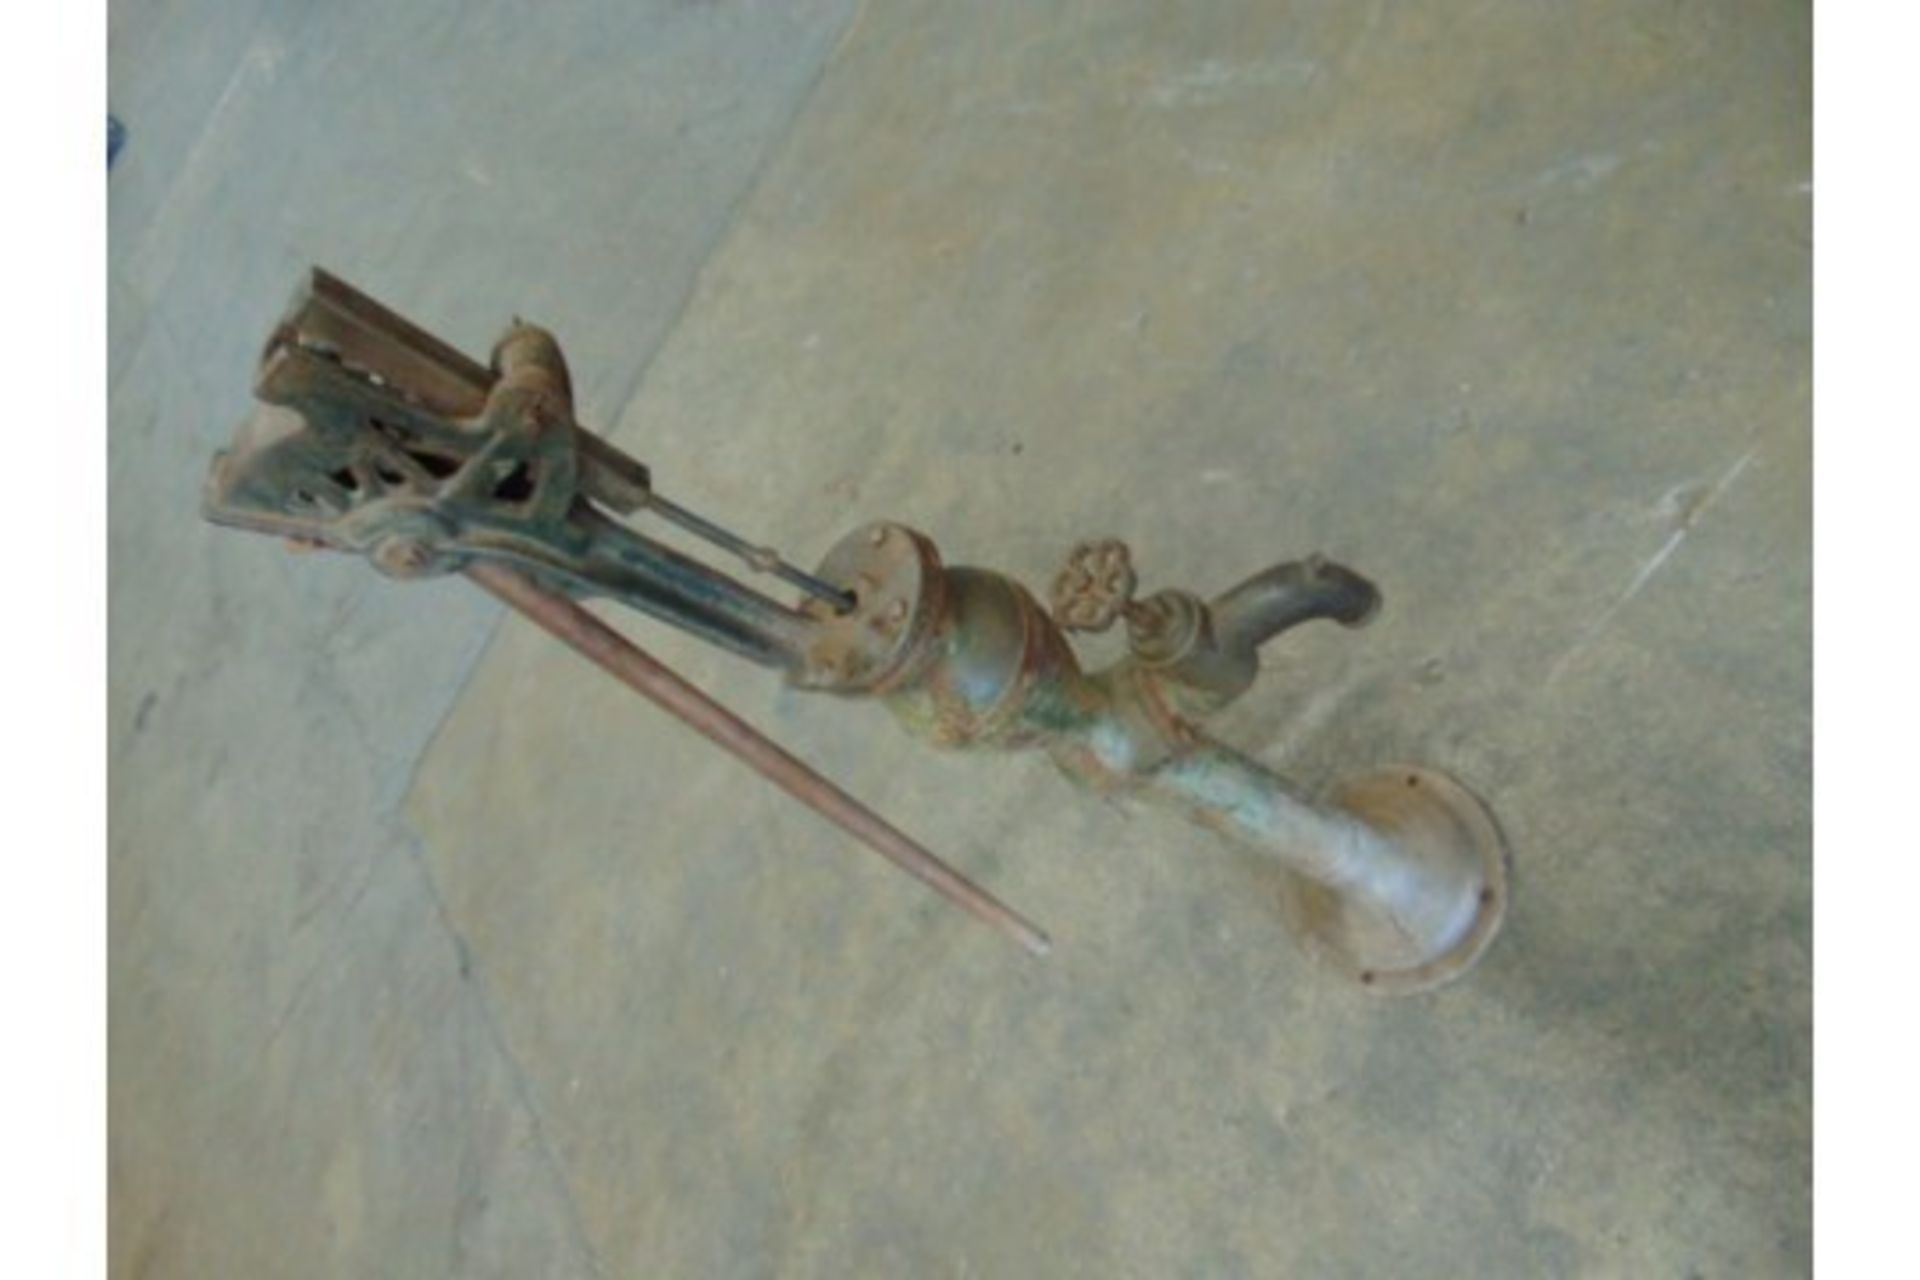 Genuine Anitique Full Size Cast Iron Water Pump - Image 2 of 7